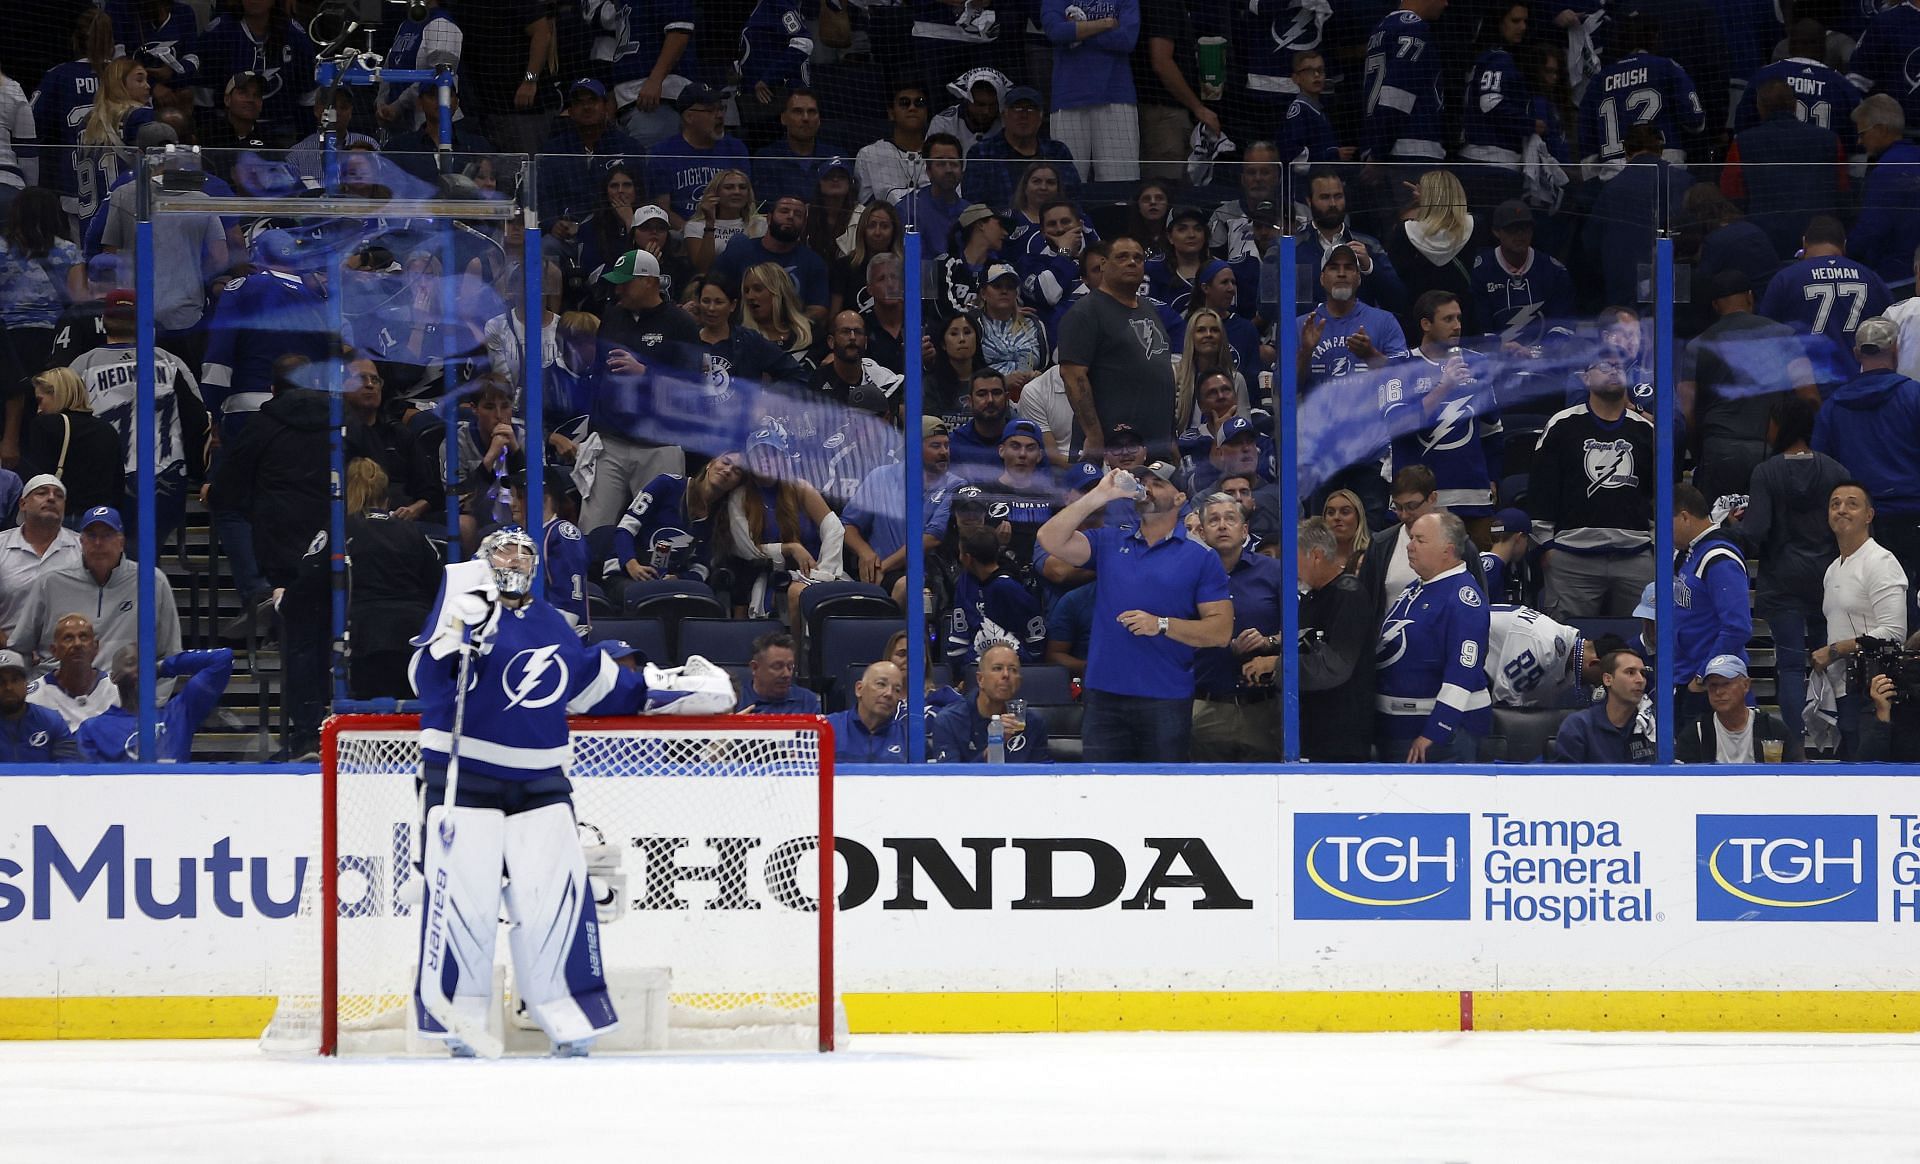 Tampa Bay Lightning 2023 Preseason Schedule Dates, TV schedule, tickets and more